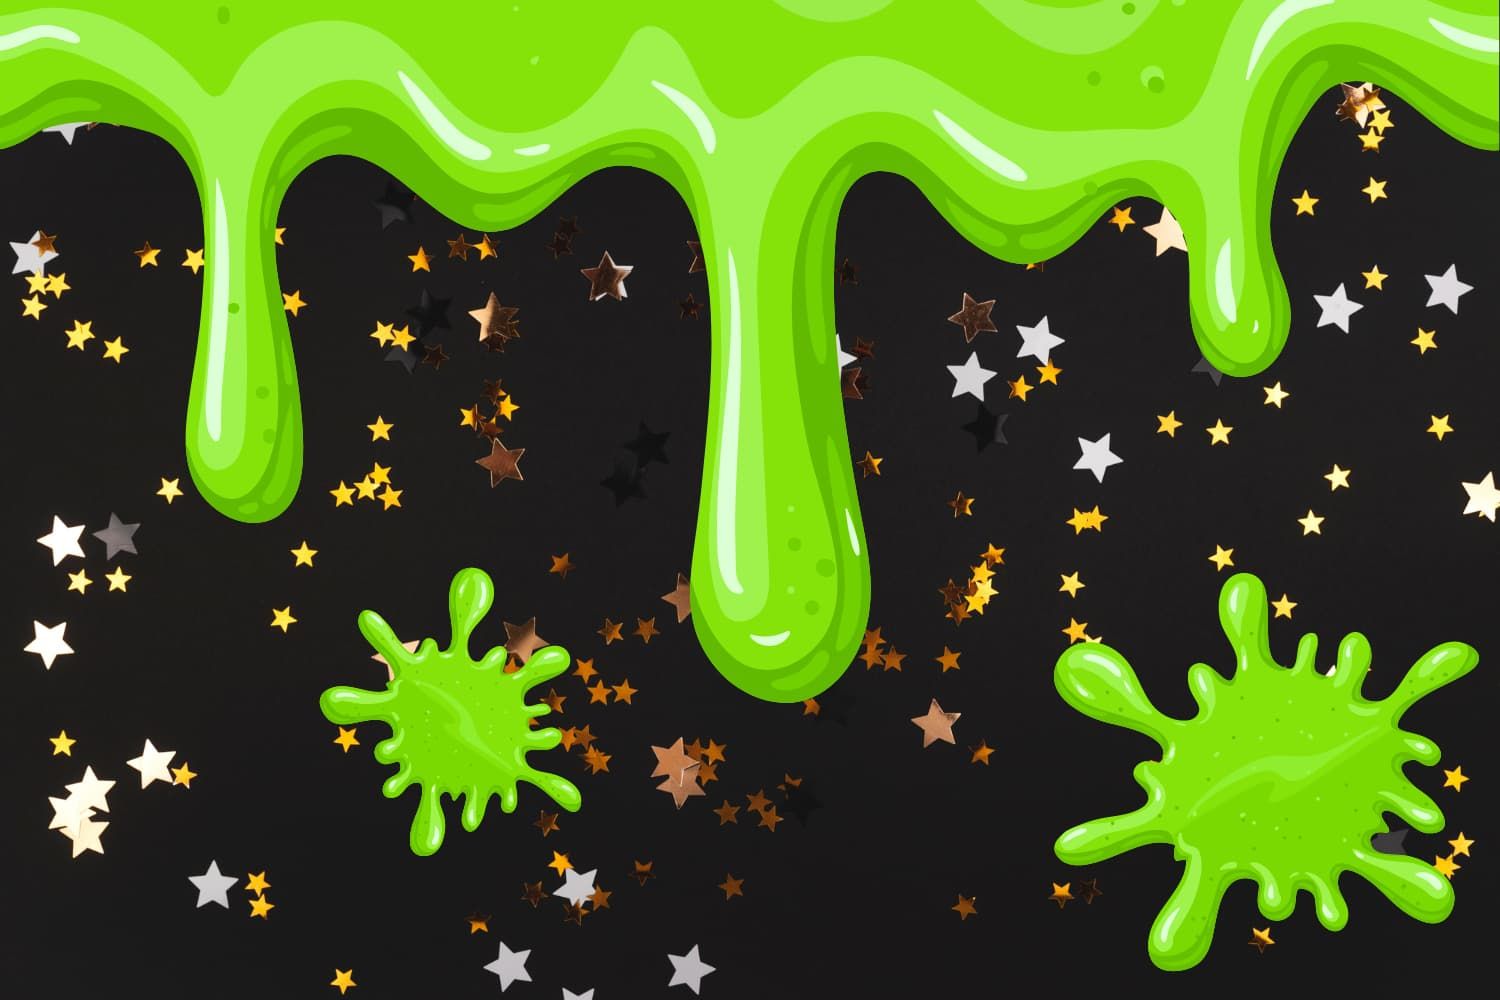 Experiment%20-%20Promise%20slime%20experiment-0808ef7c Abram counts all the stars